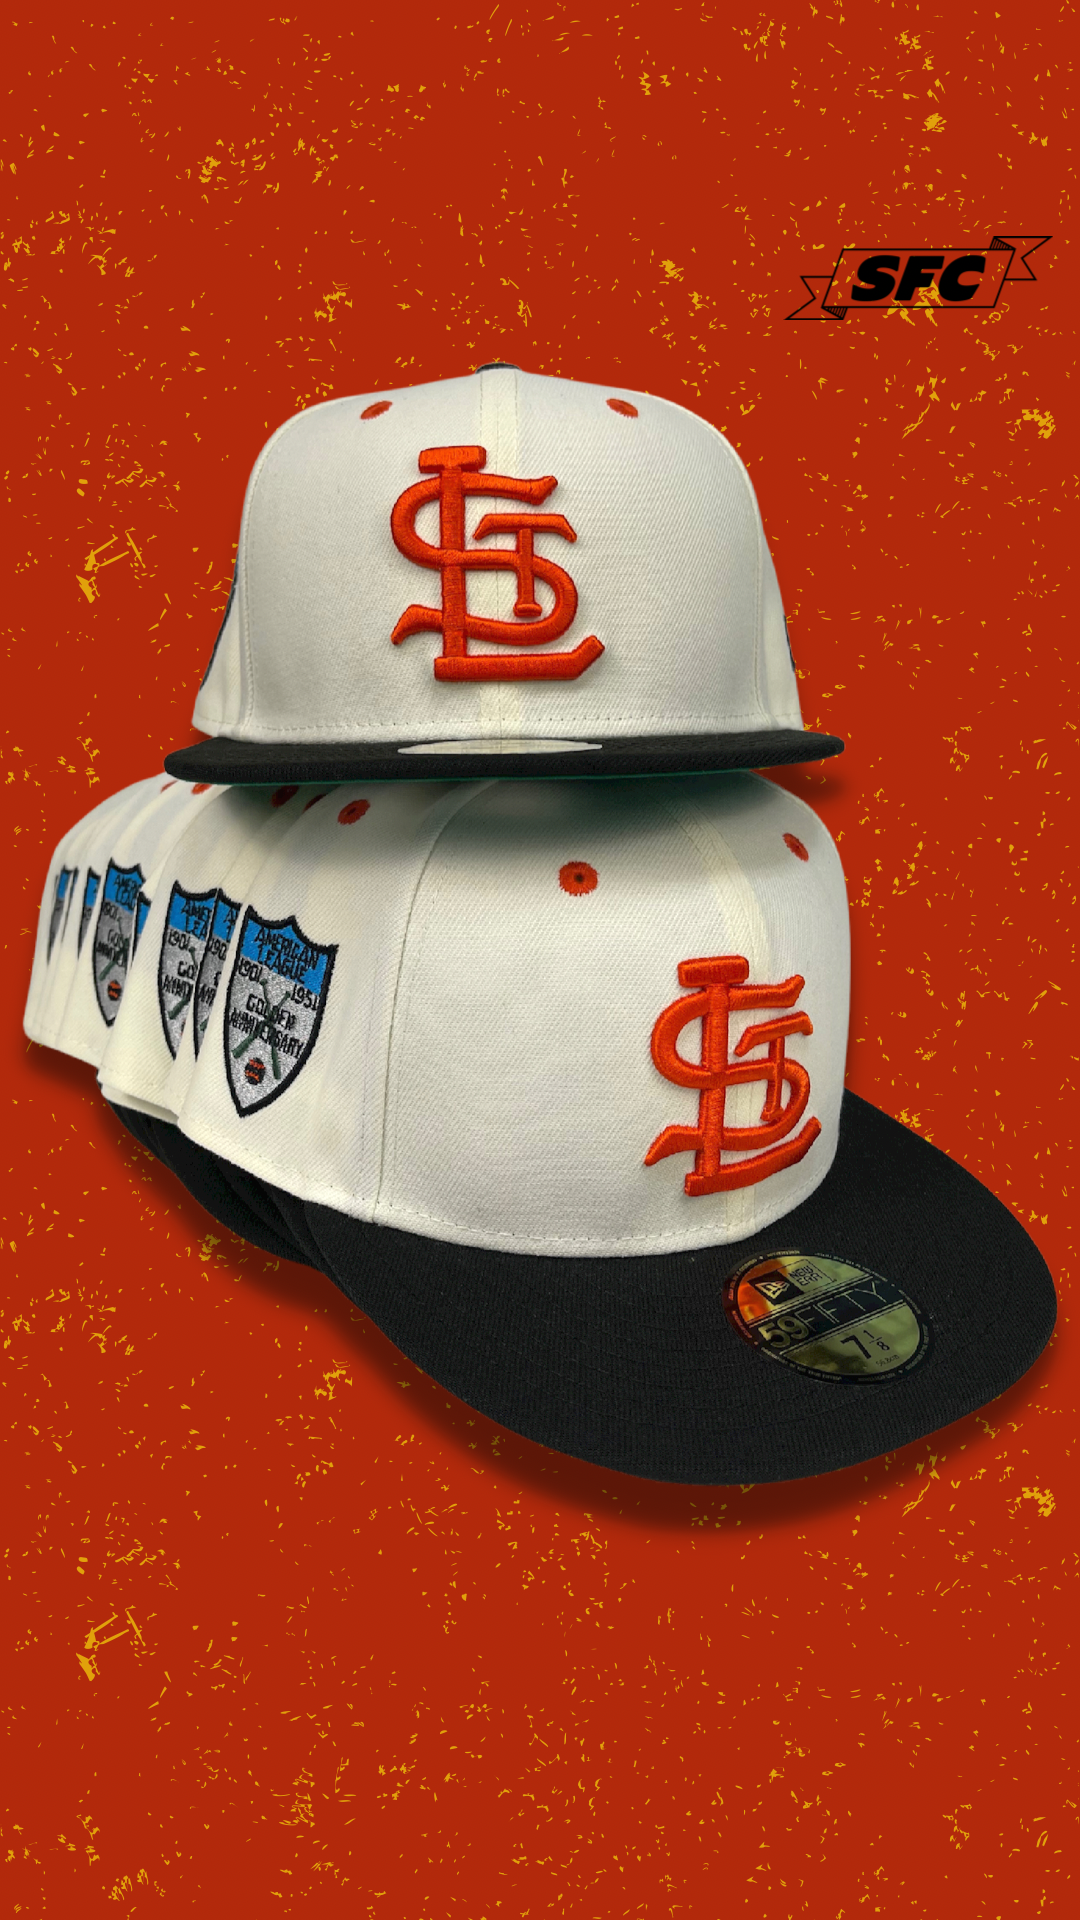 NEW ERA COUNTRY CLUB 2.0 ST. LOUIS BROWNS FITTED HAT (CHROME